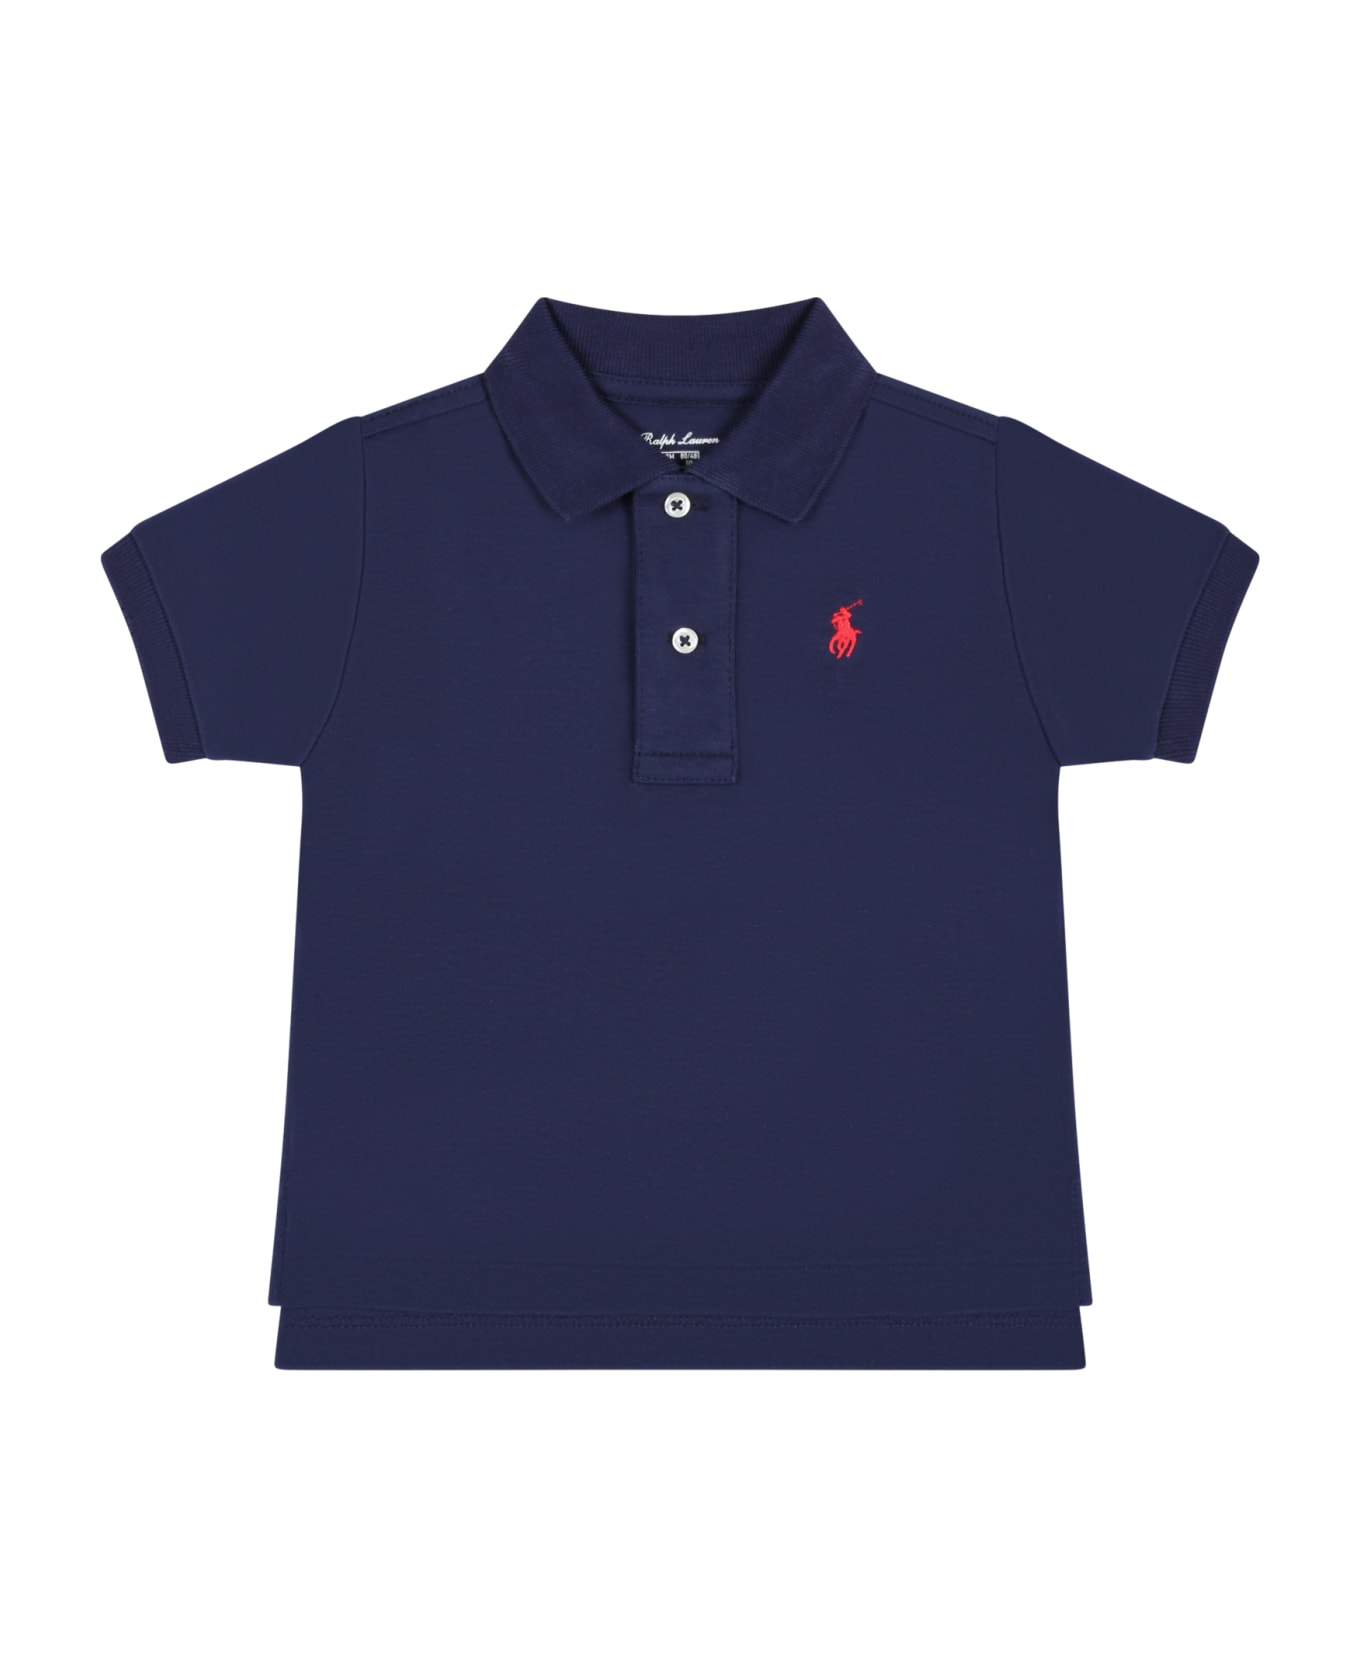 Ralph Lauren Blue Polo-shirt For Baby Boy With Iconic Red Pony - Blue